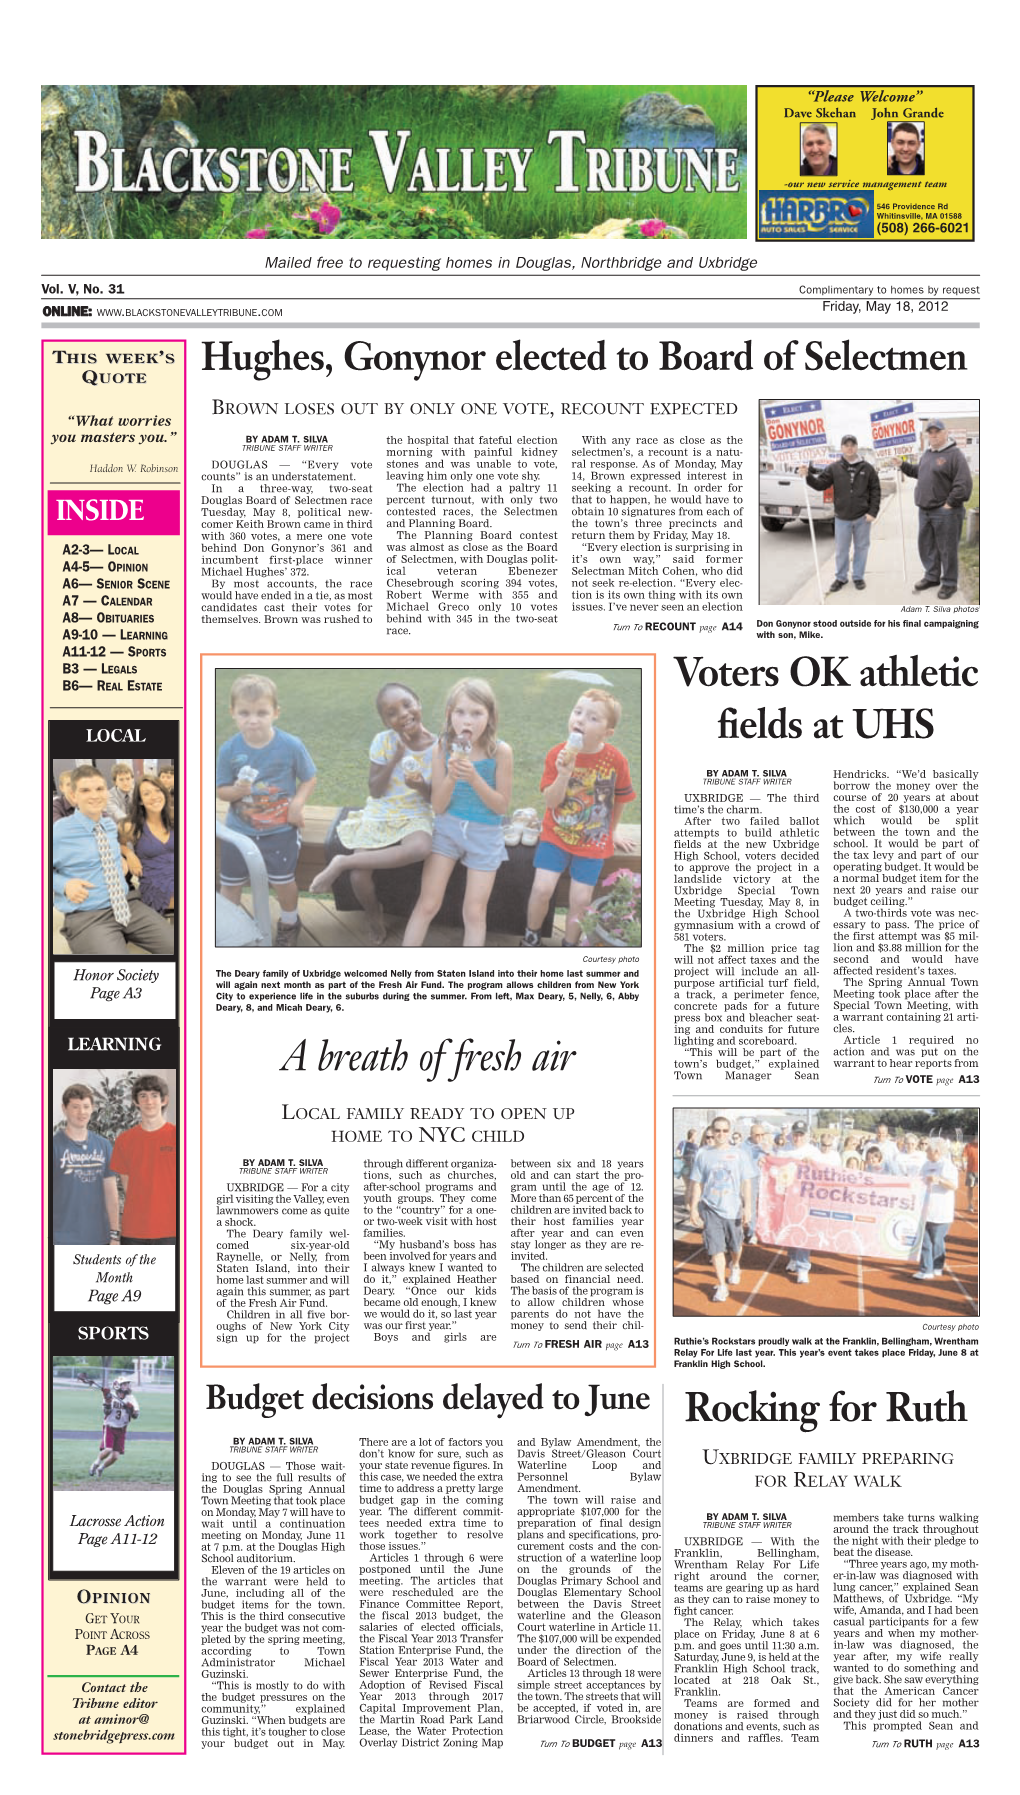 A Breath of Fresh Air Town Manager Sean Turn to VOTE Page A13